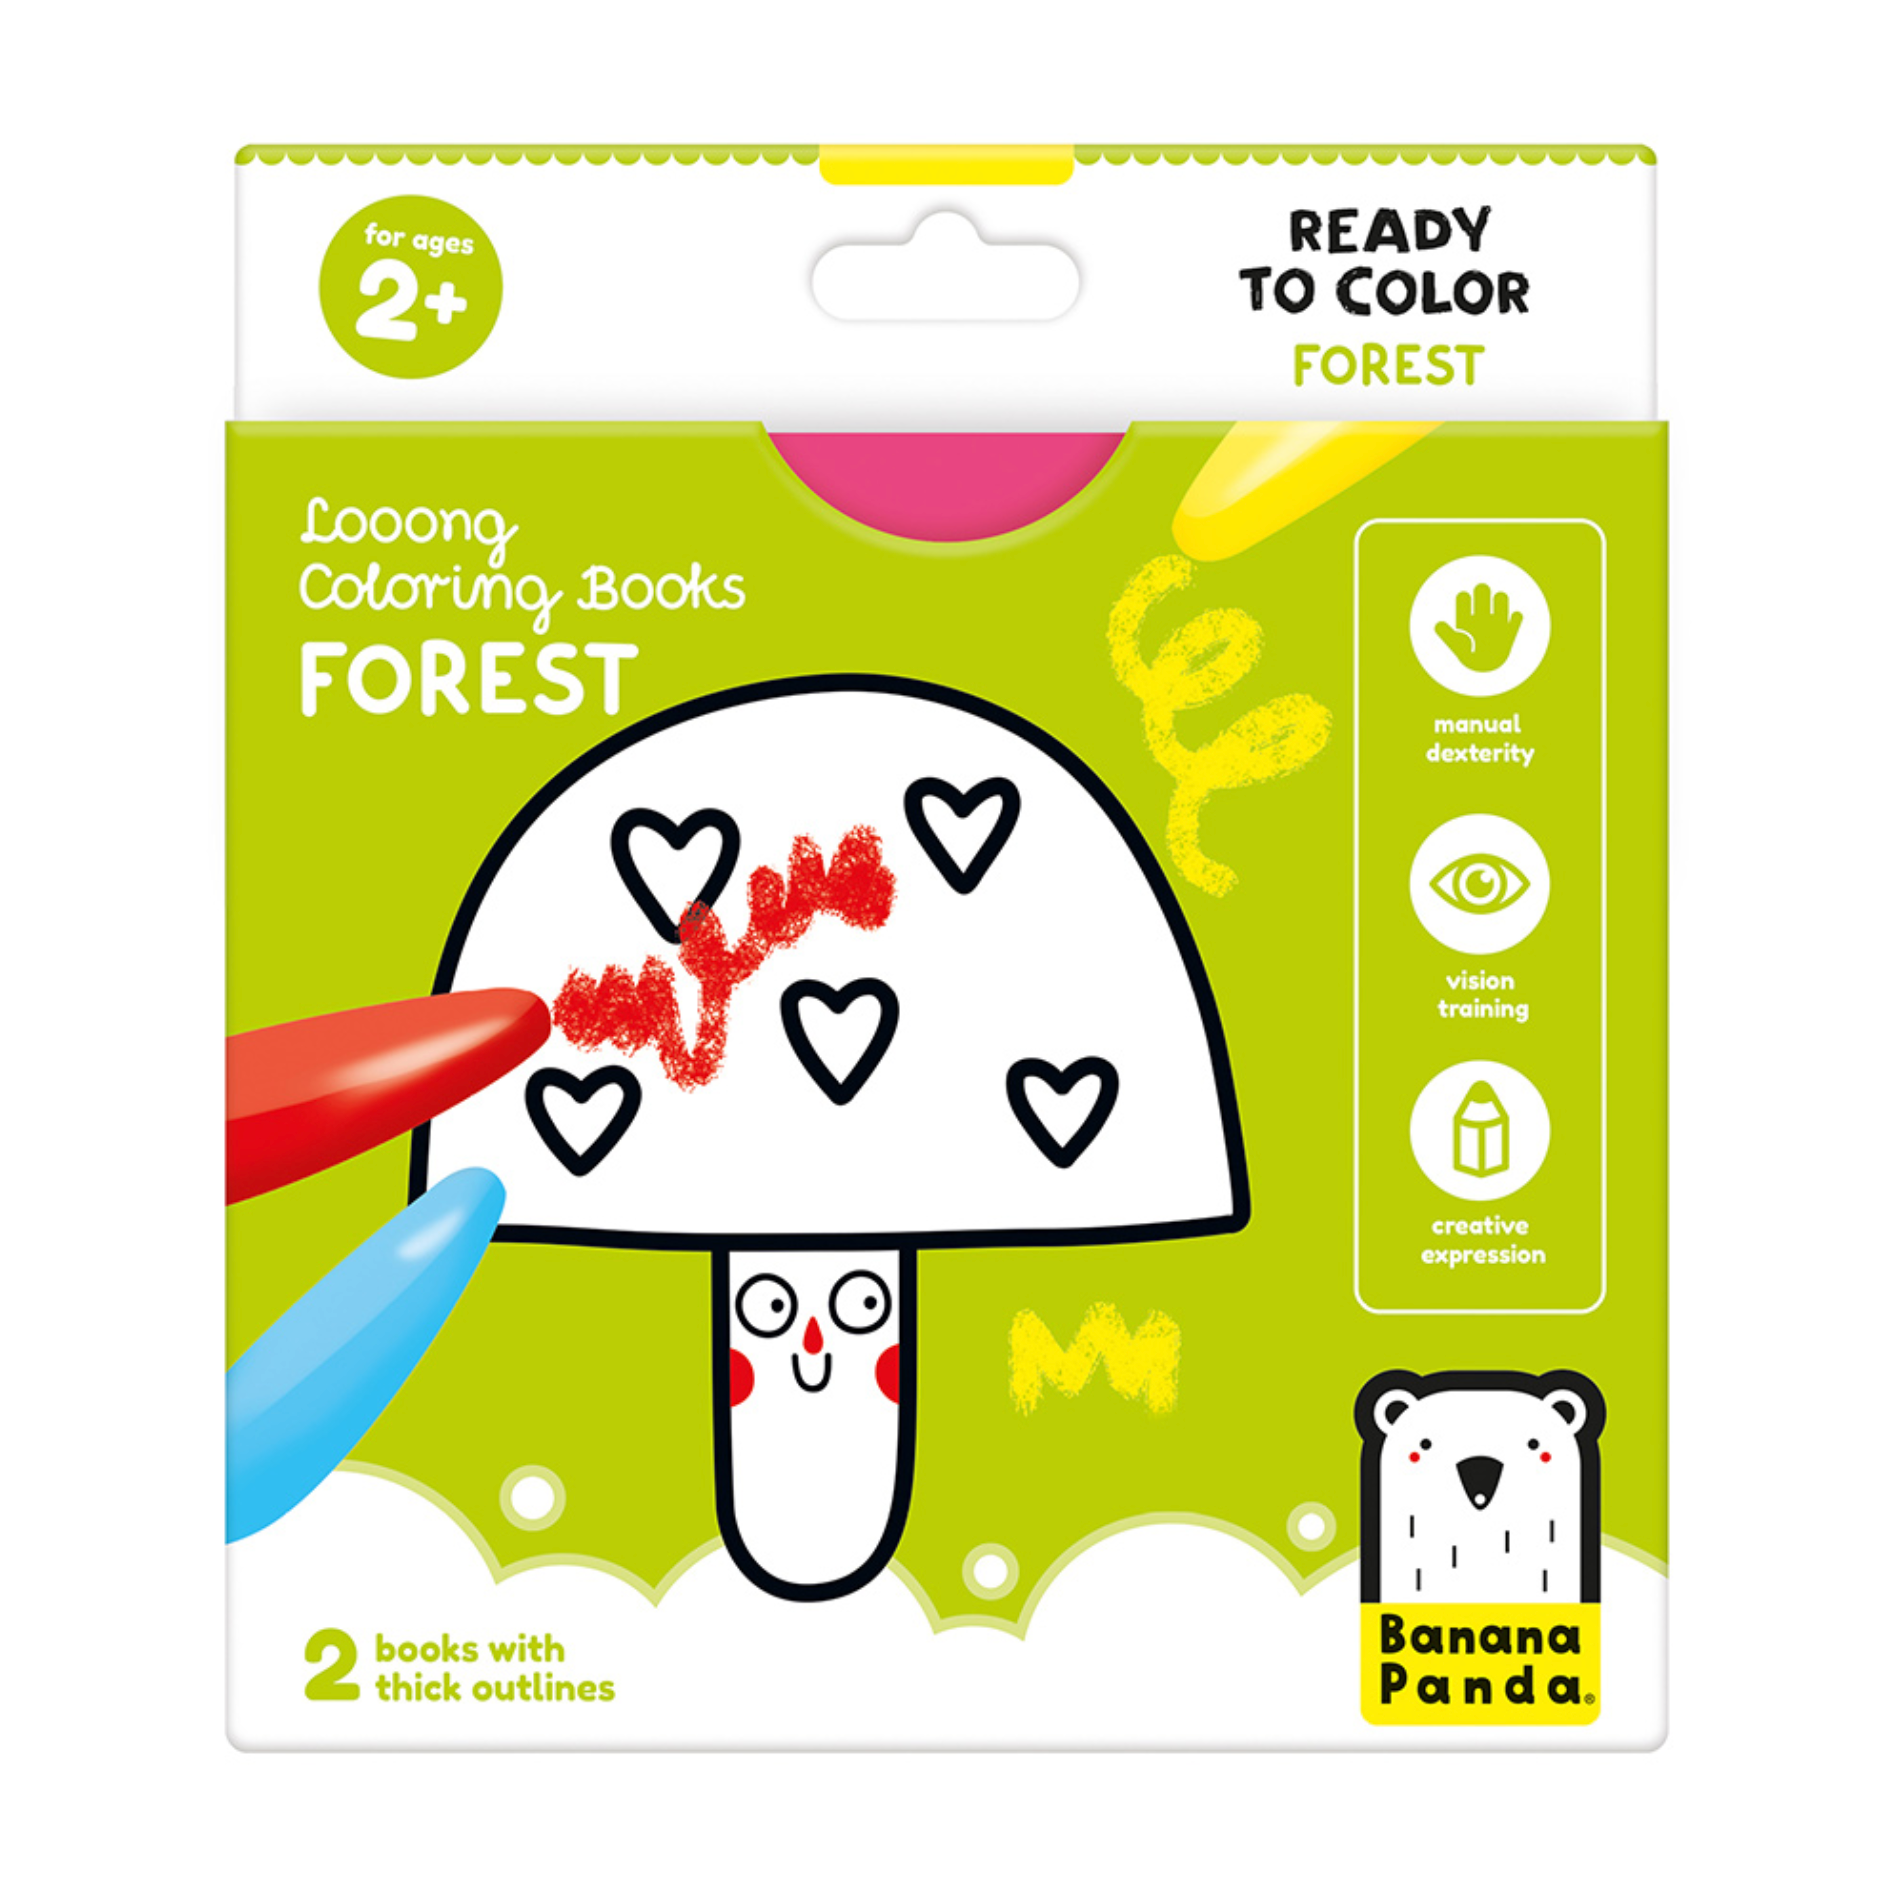 Looong Coloring Book - Forest